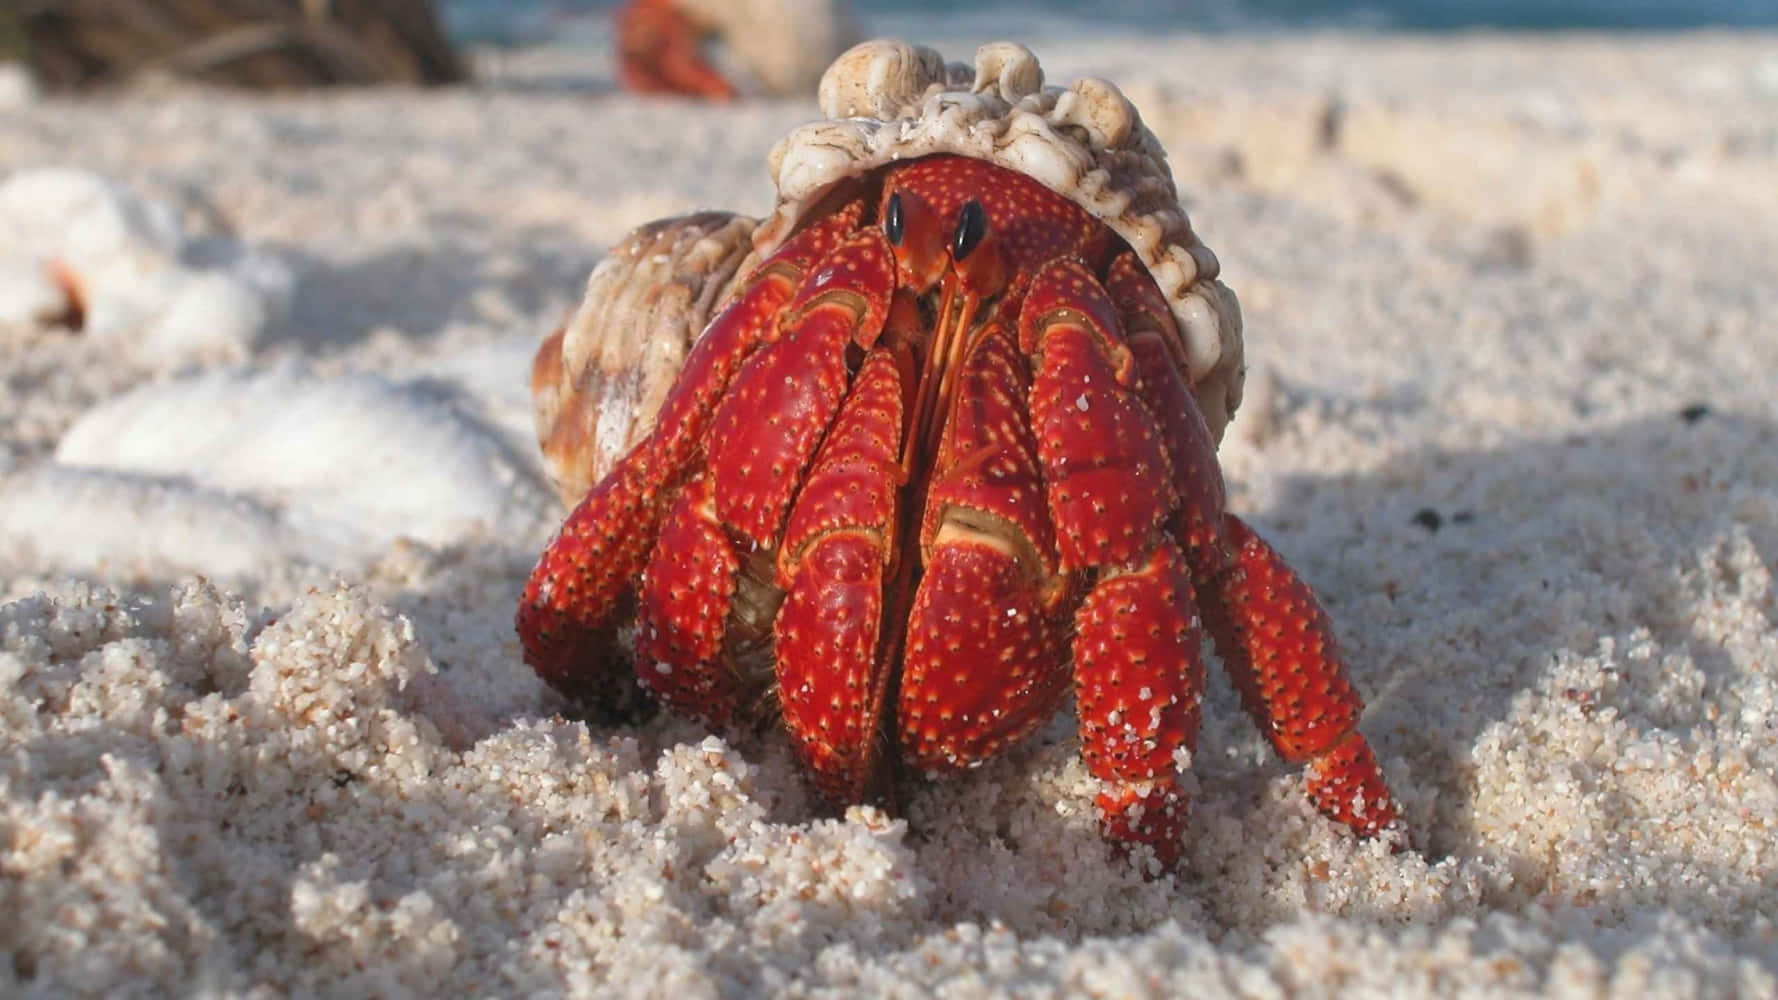 A Fascinating View Of Hermit Crab On The Beach Wallpaper